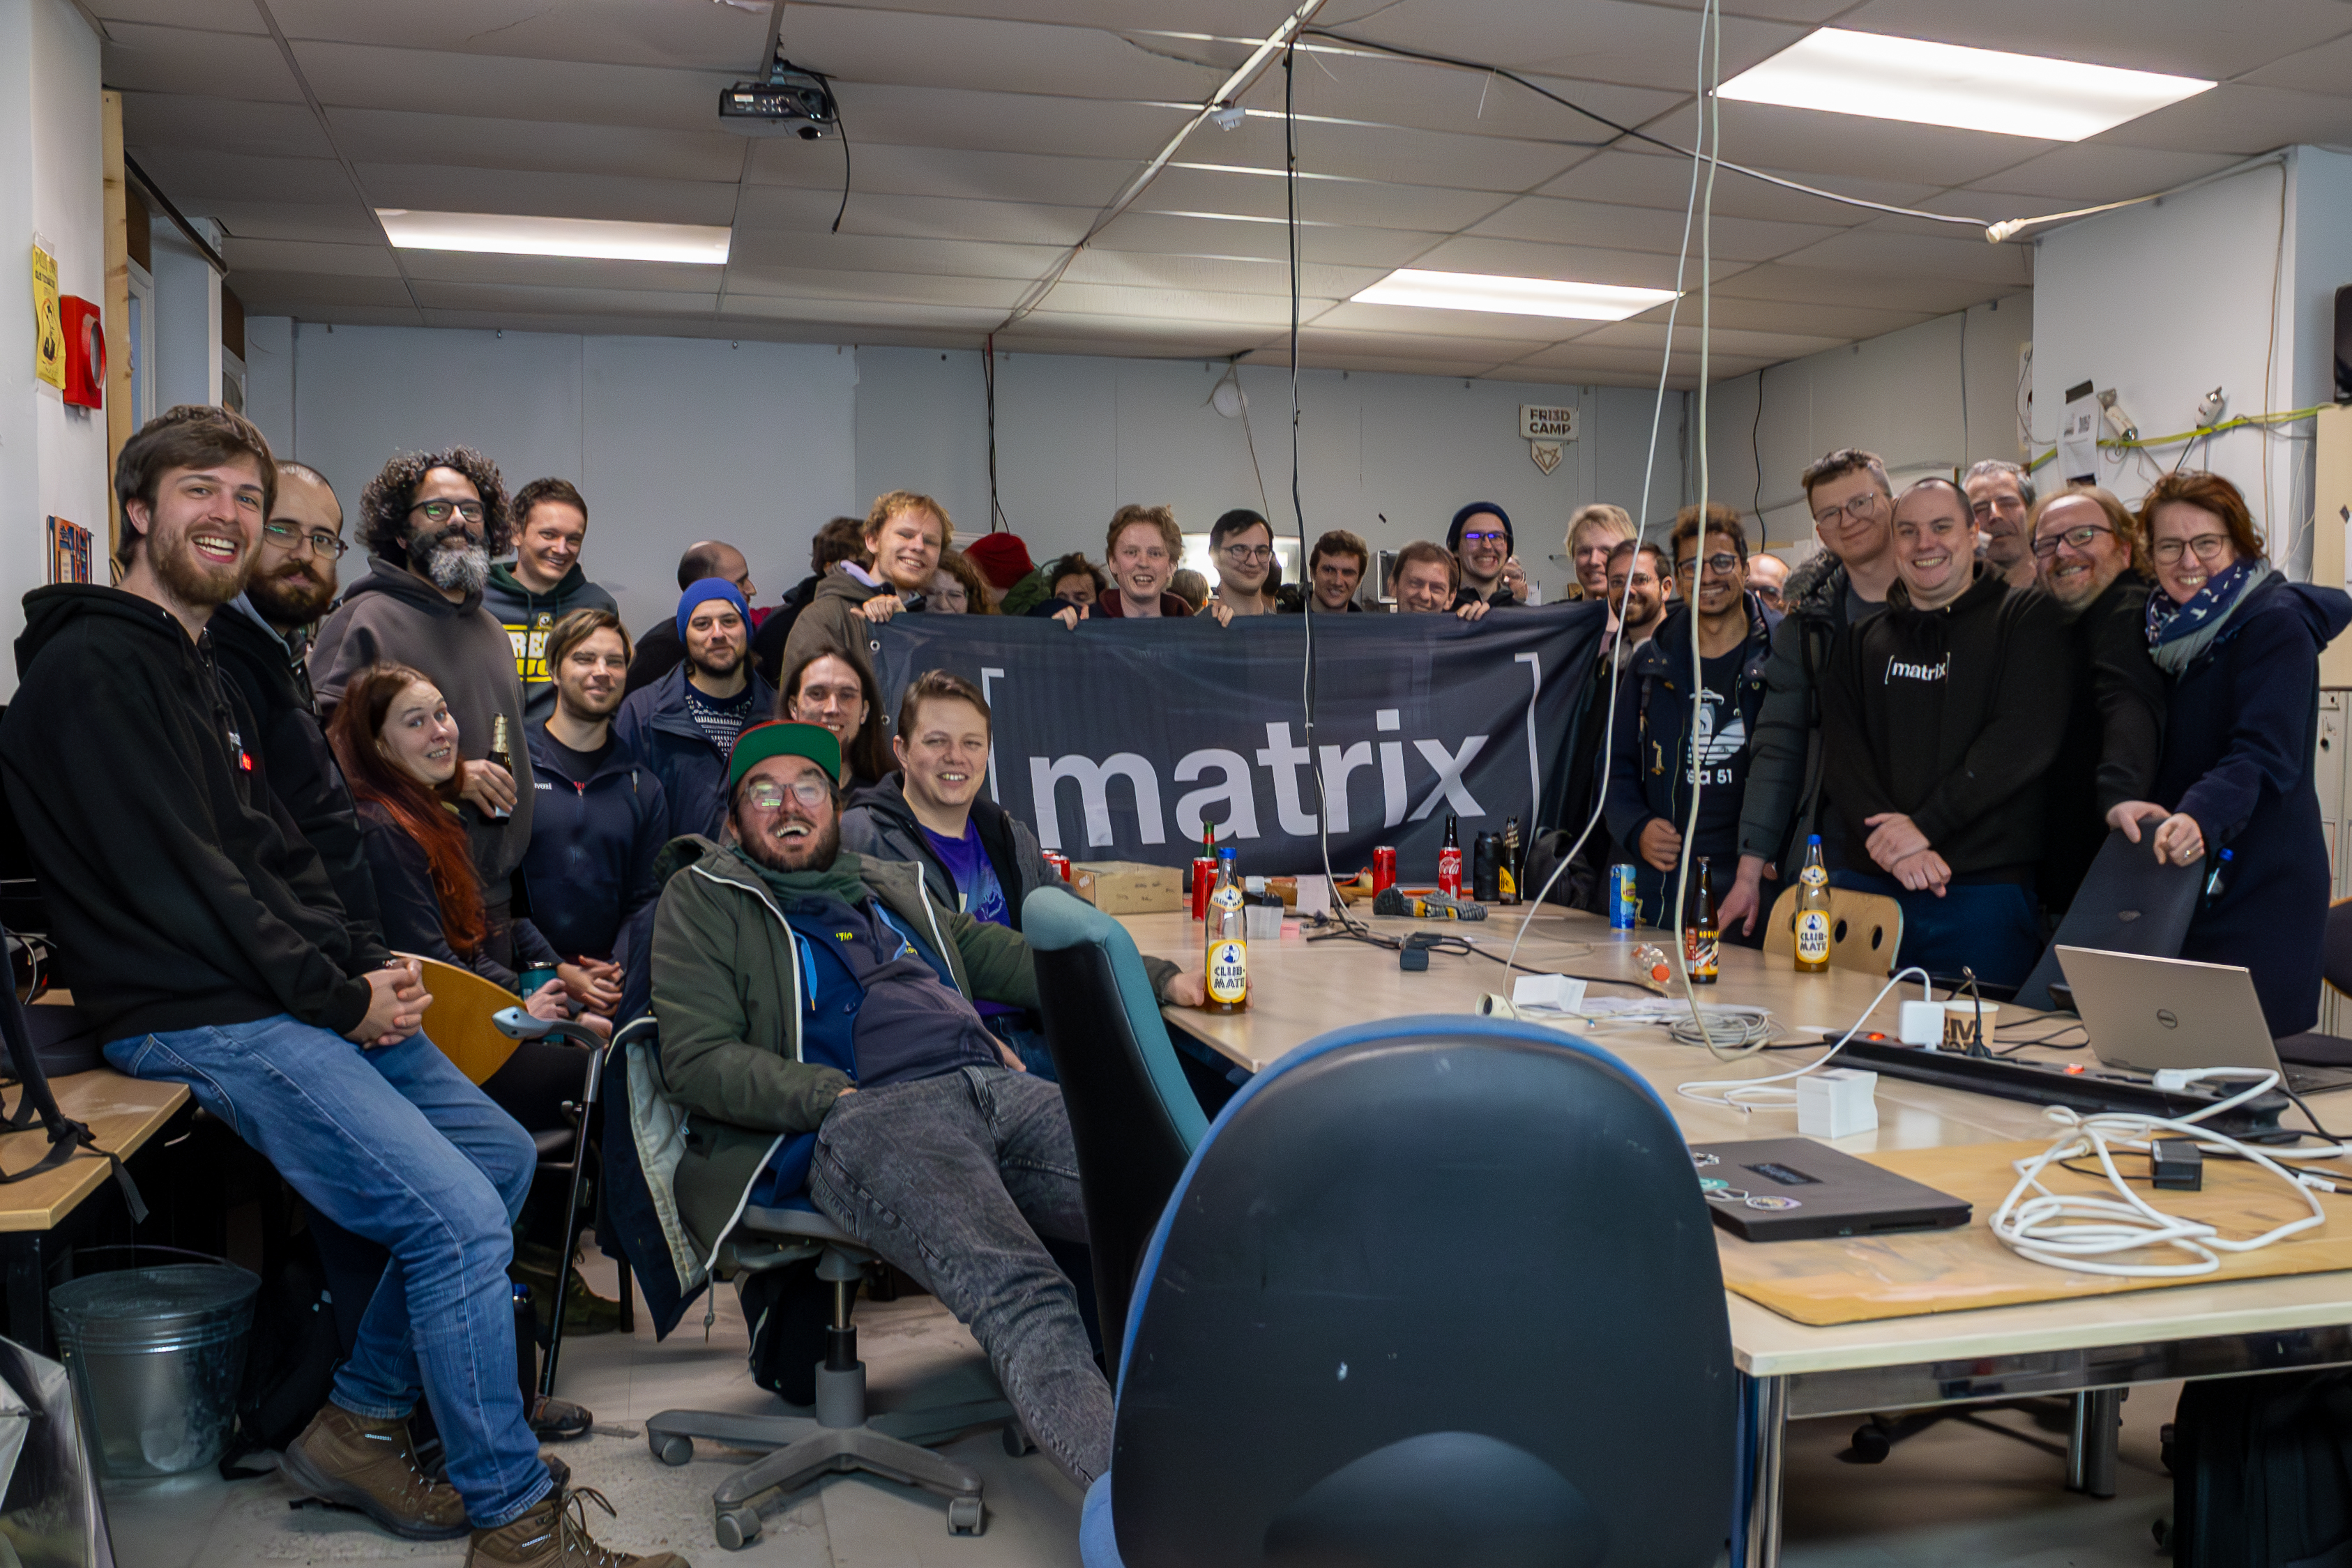 A group picture taken at the Matrix Community Meetup in Brussels showing around 30 attendees in a crowded hackerspace room with several Club Mate bottles on the table